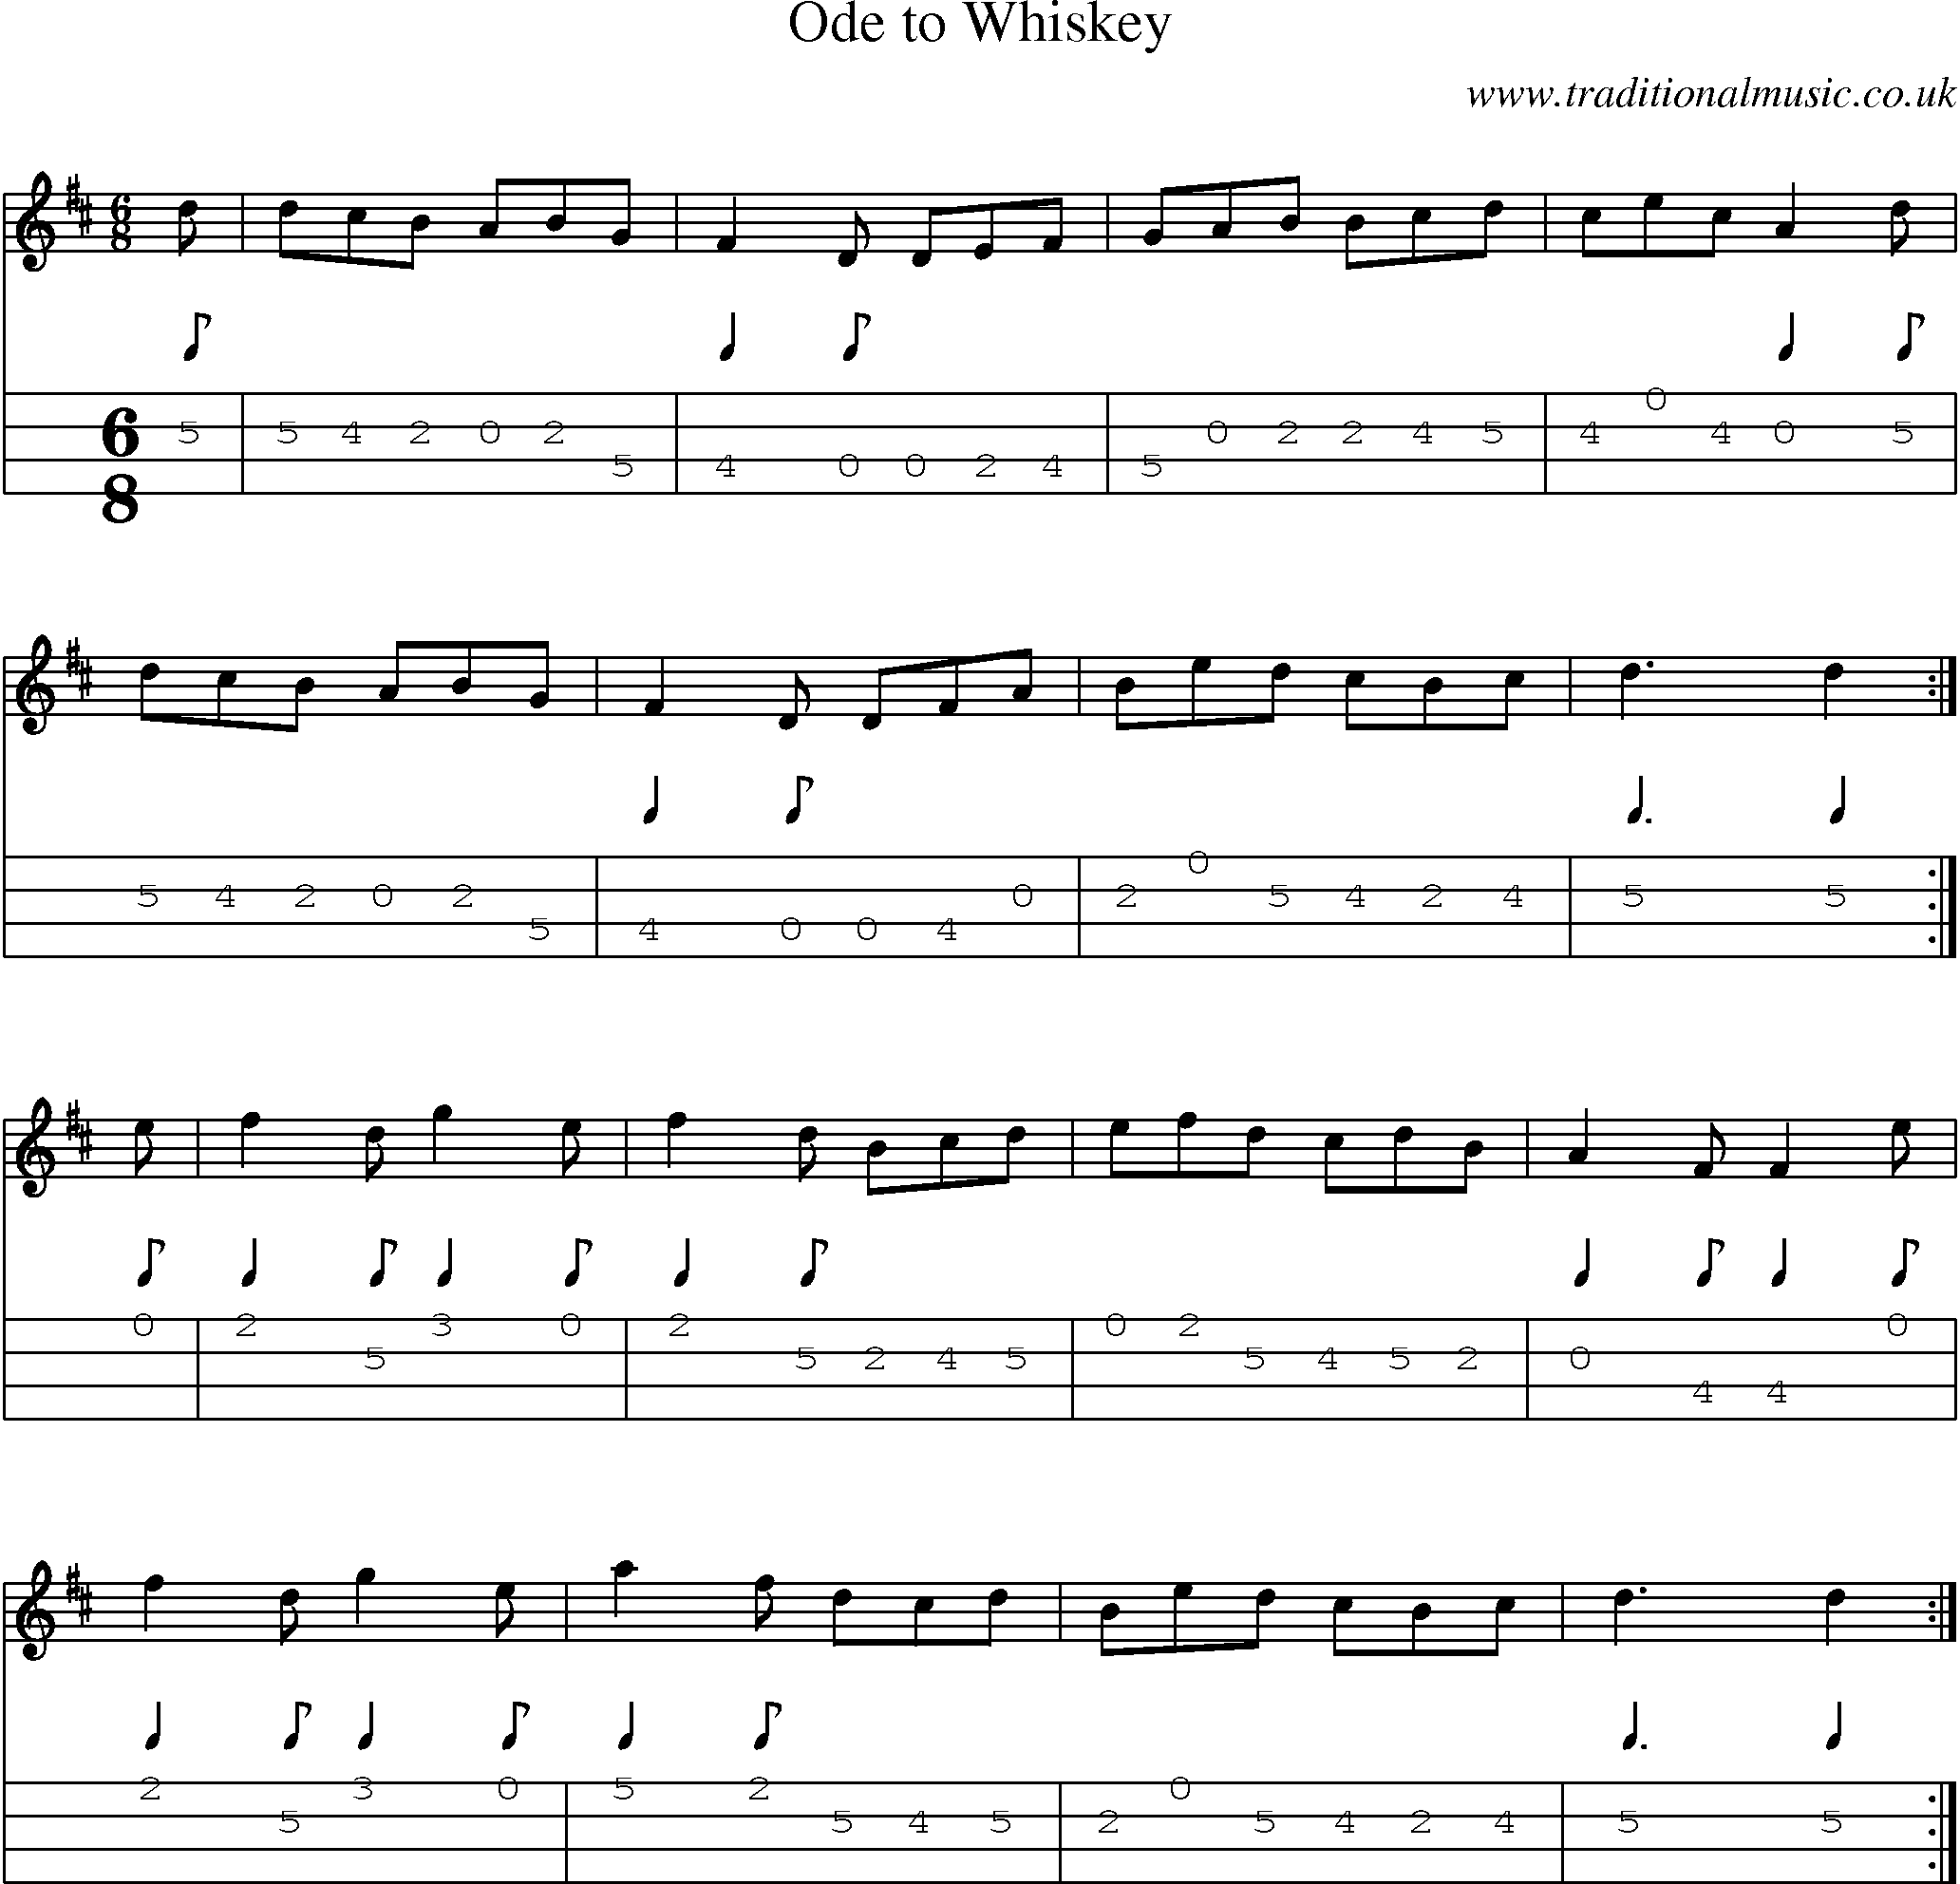 Music Score and Mandolin Tabs for Ode To Whiskey